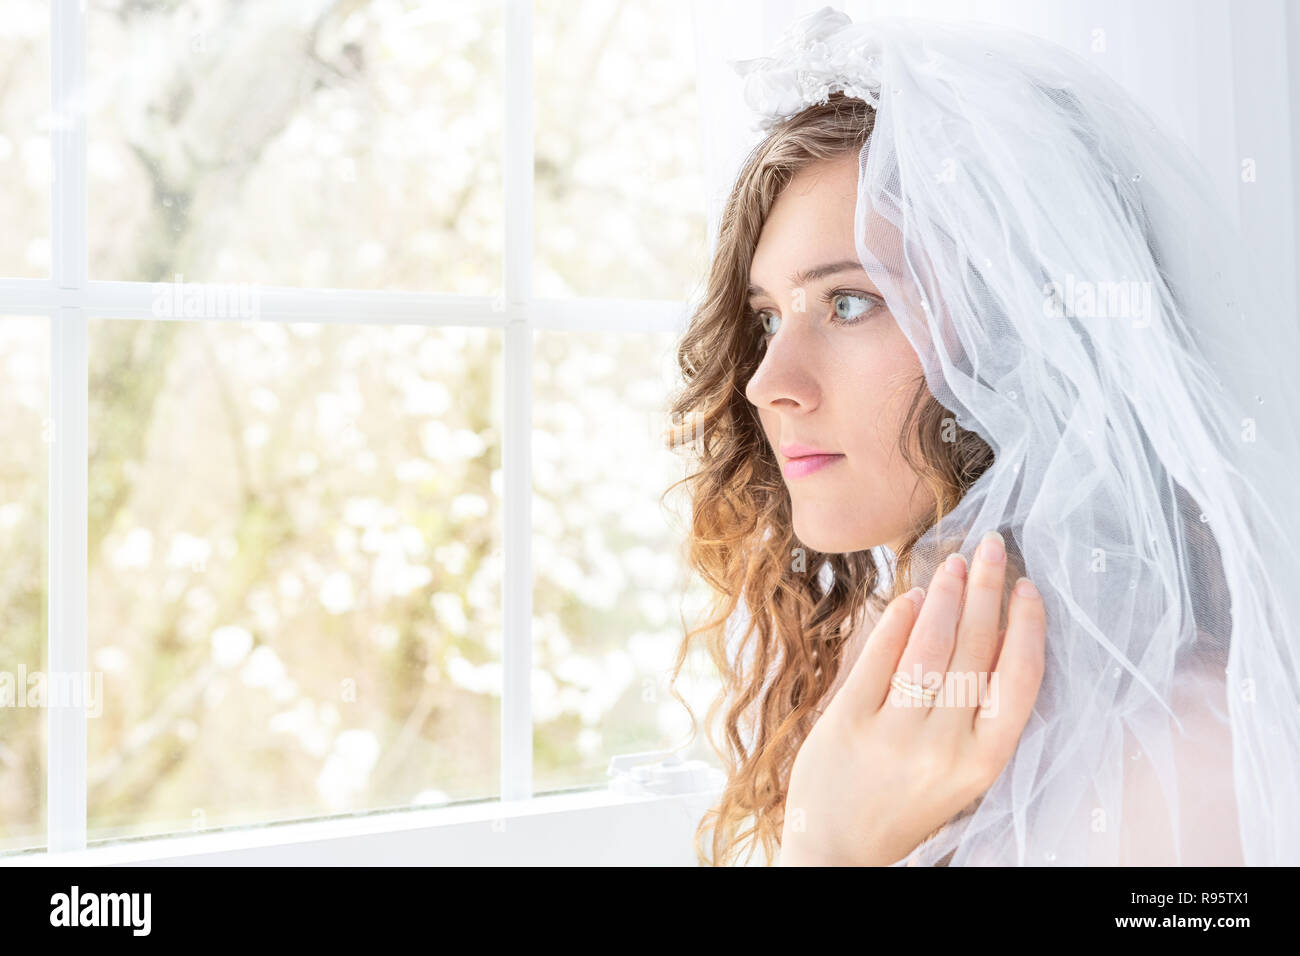 Closeup side, profile portrait of young female person, woman, bride, wedding dress, veil, face, pearl necklace, hair, standing, looking through glass  Stock Photo